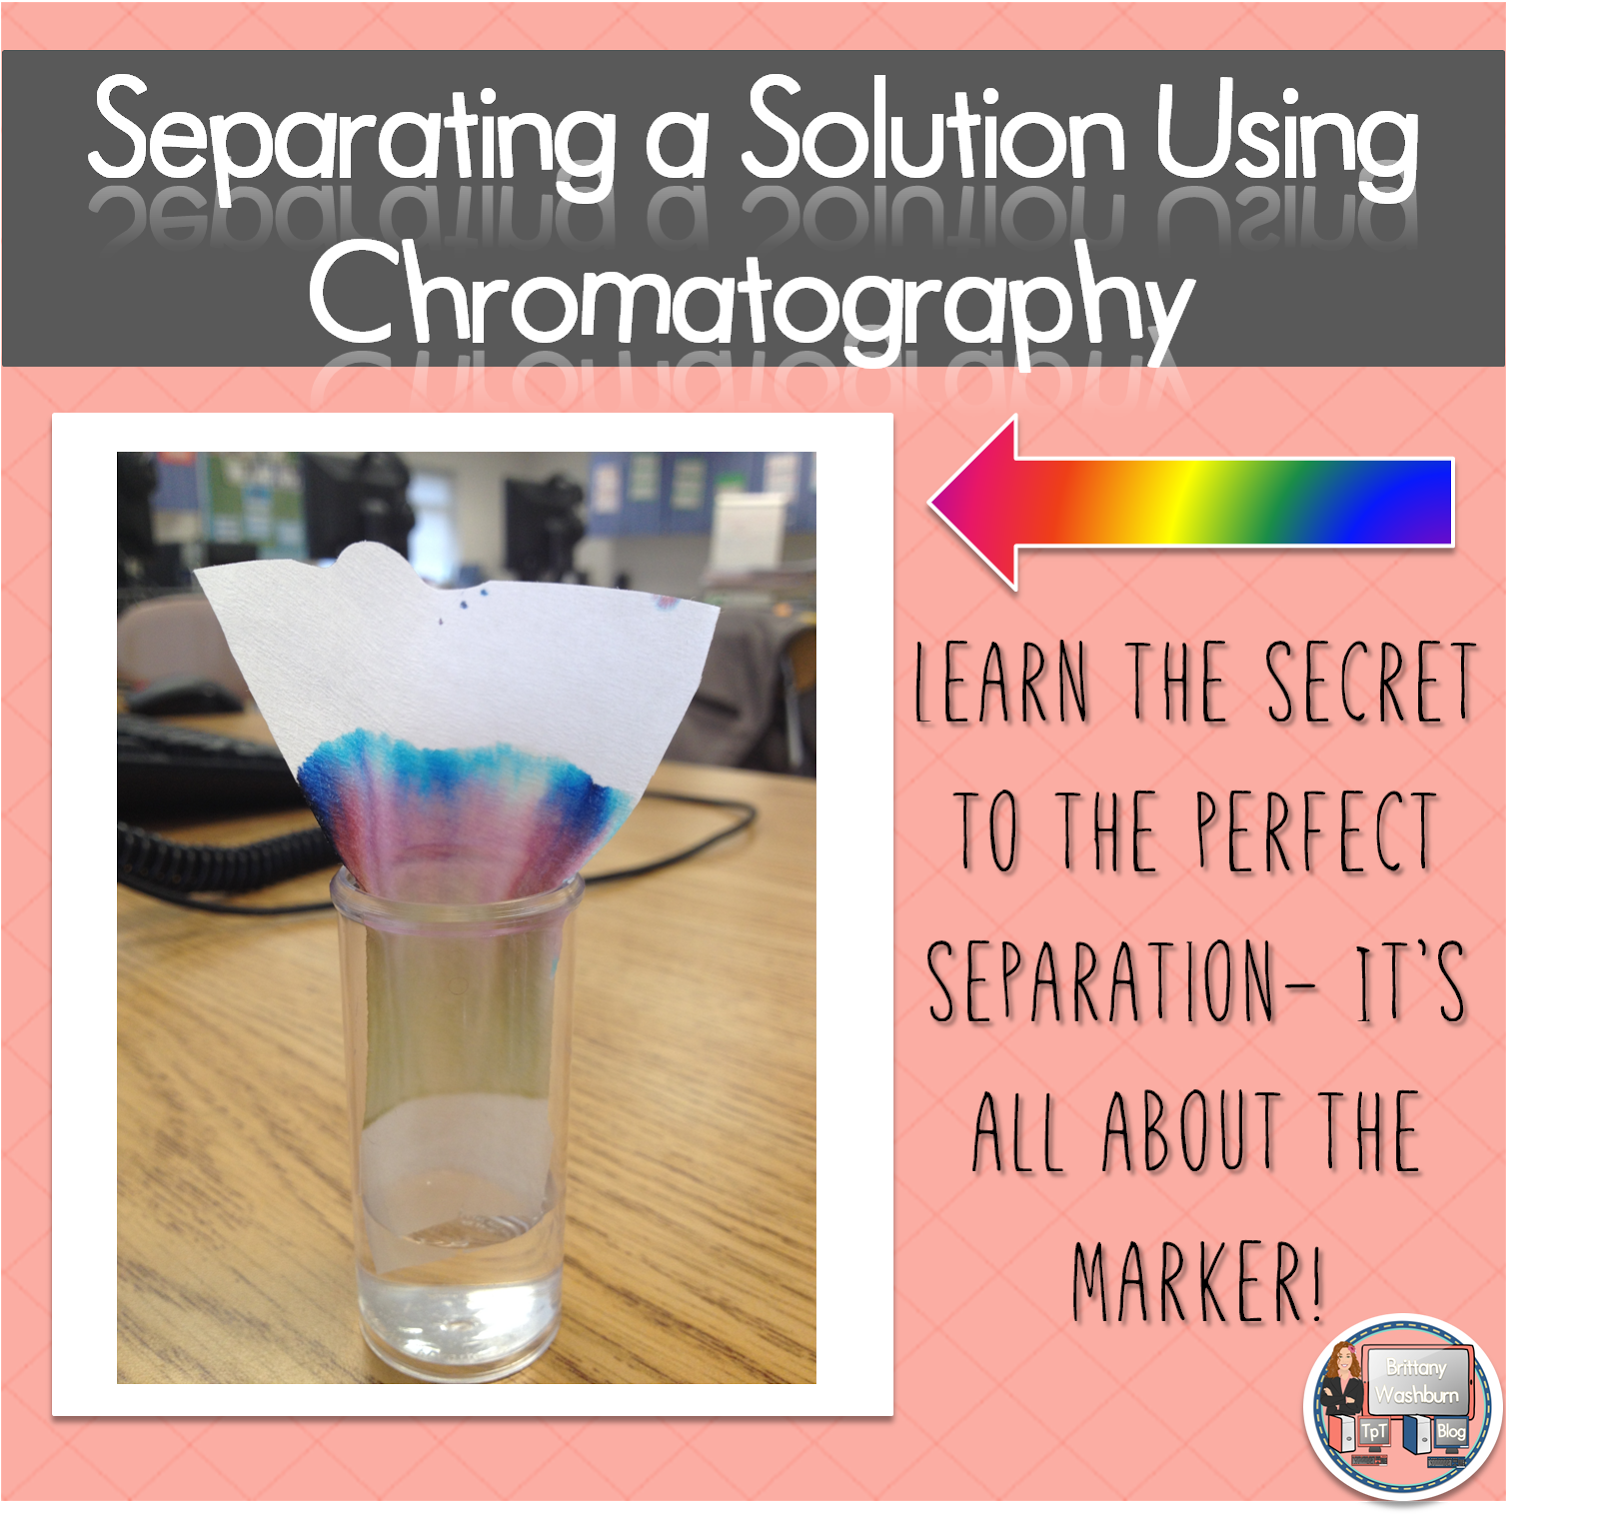 My students absolutely loved this experiment on Separating a Solution with Chromatography! The worksheets walk them through the steps so at the end we had to write conclusions. We had a bit of time left so I let several students share what they wrote and show their stopmotion videos. It was a hit!